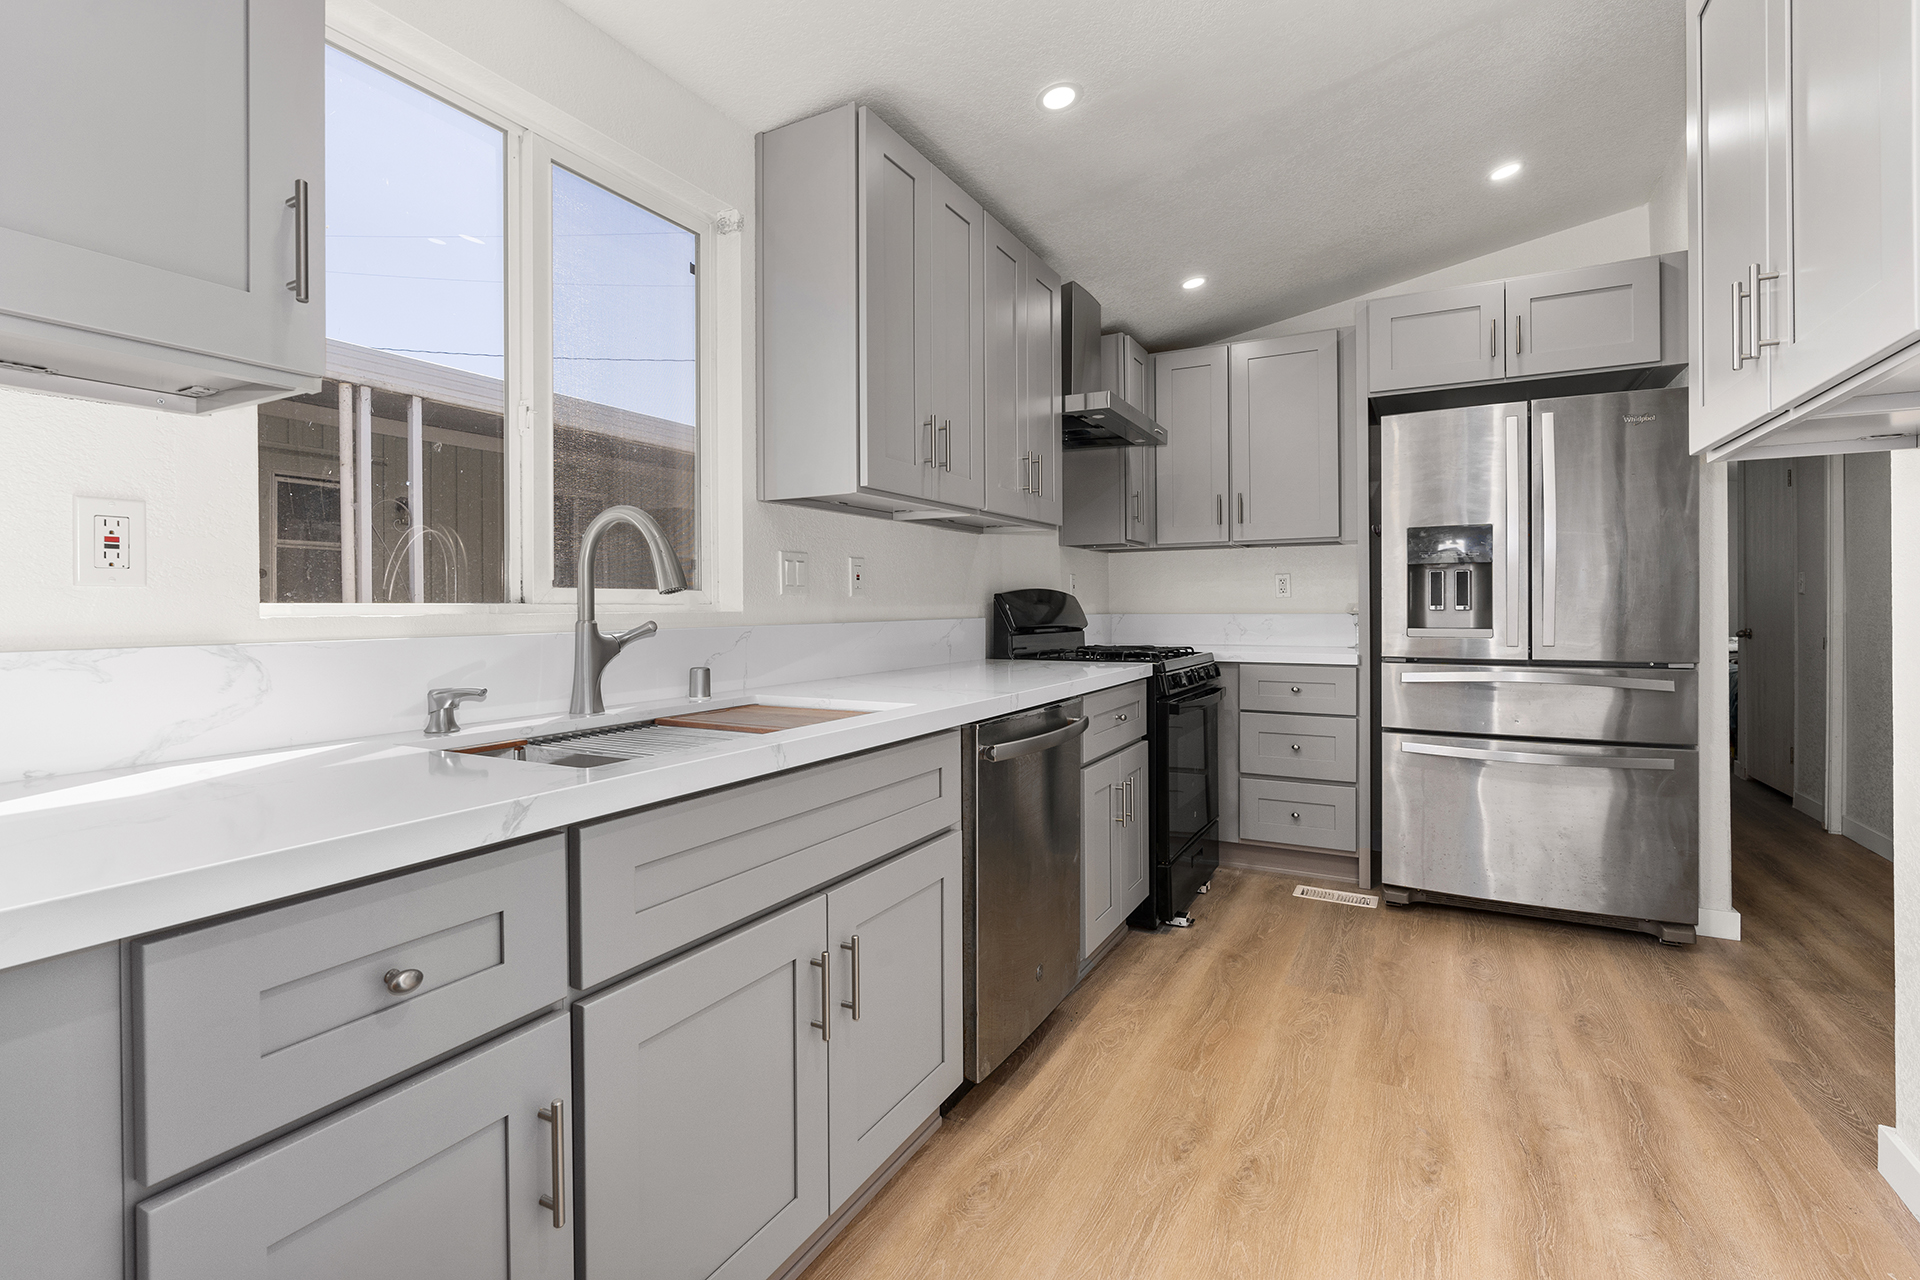 Kitchen Remodeling Contractor in San Diego